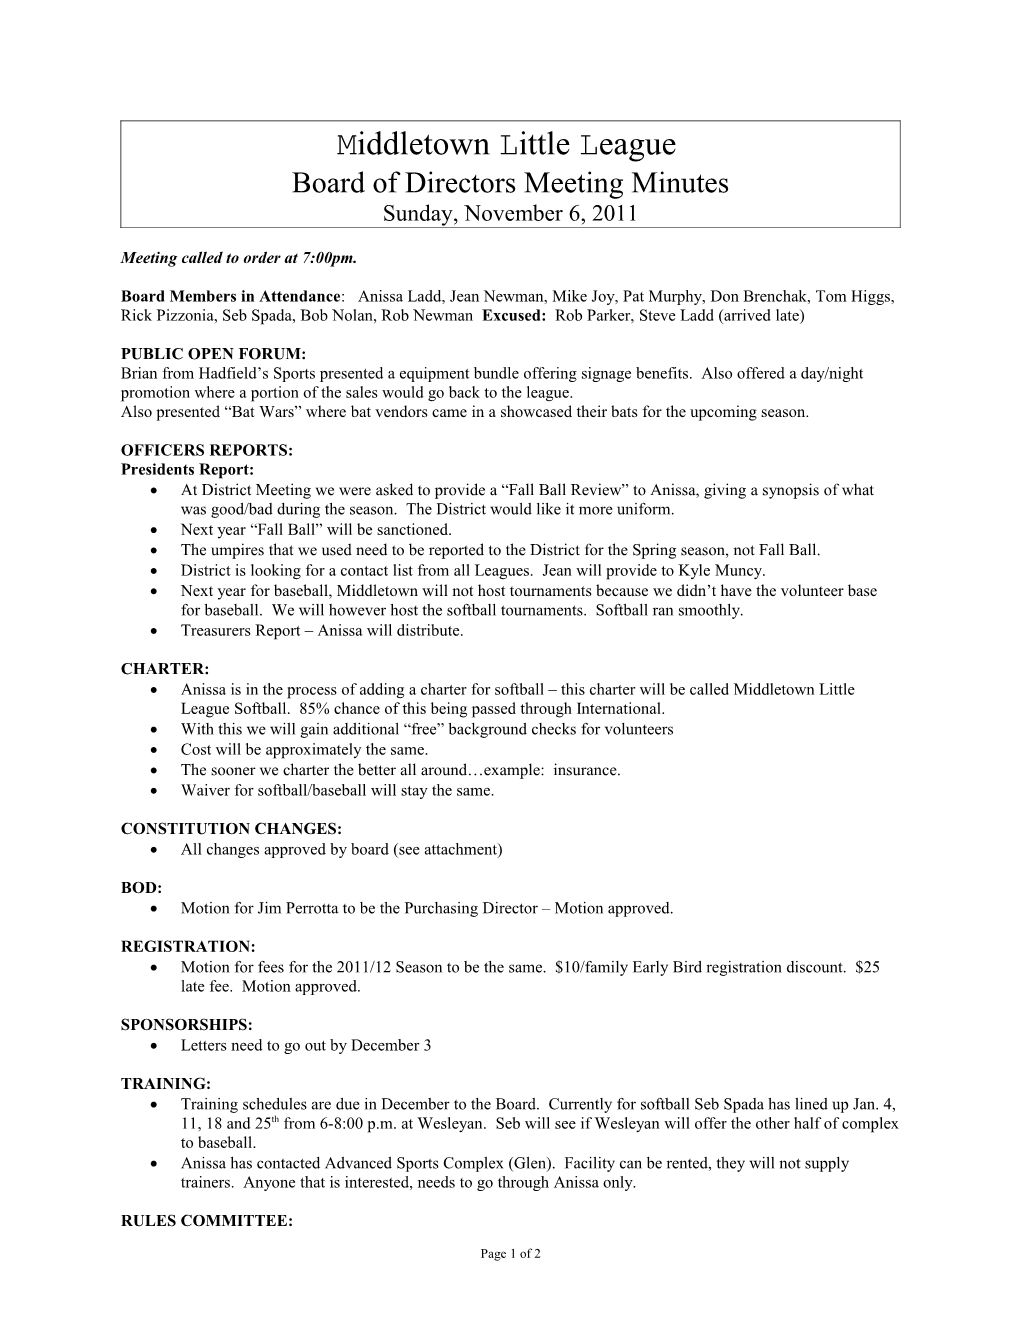 Middletown Little League Board of Directors Meeting Minutes